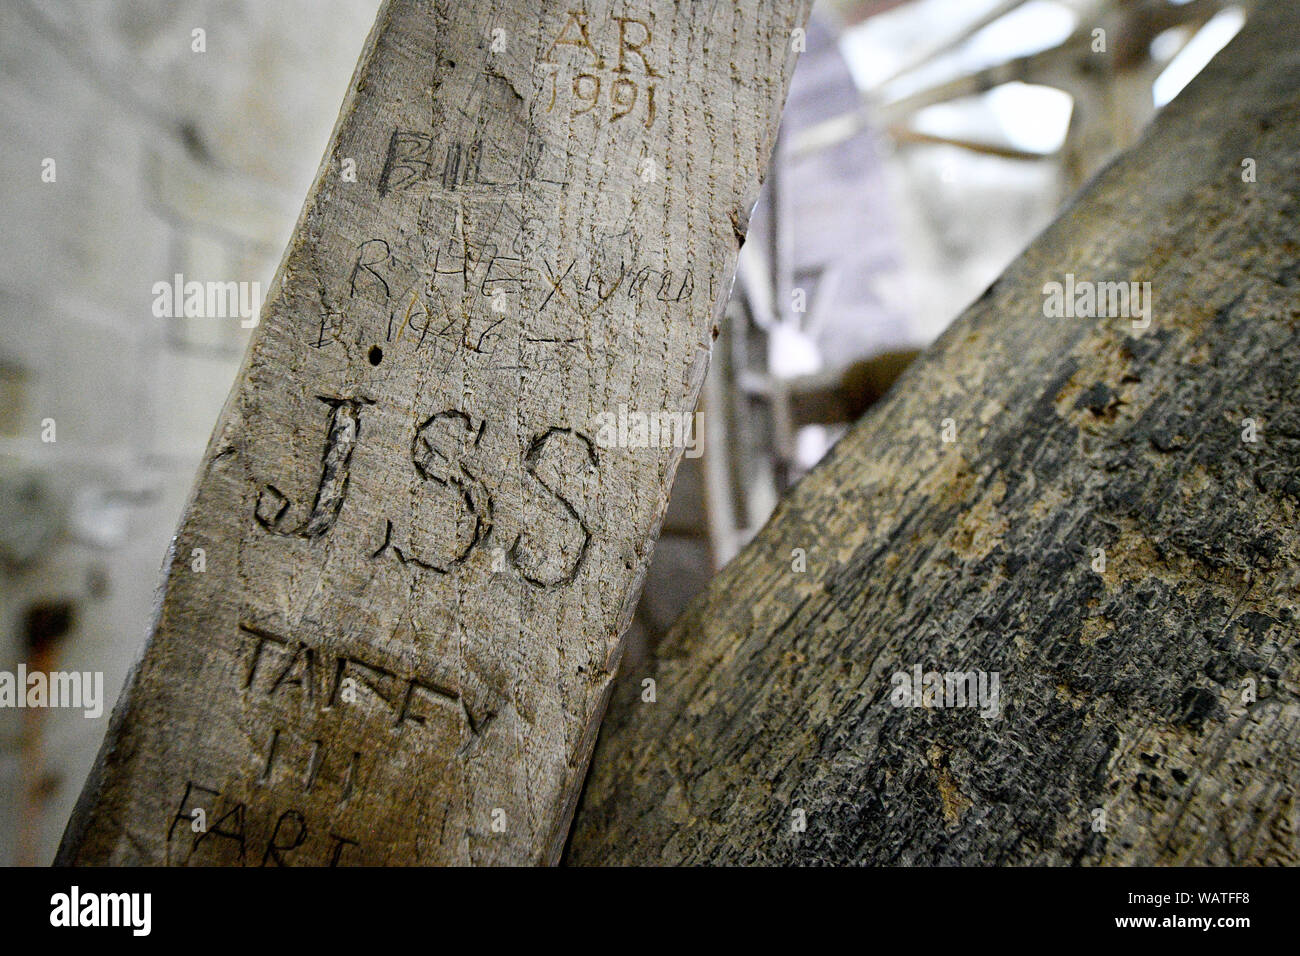 Graffiti on wooden beams, probably left by visitors at the spire base, which can be seen during the Salisbury Cathedral Tower Tour, where visitors are guided up to the base of the 123 metre tall spire, climbing 332 mainly spiral steps, through the vaulted roof space, past medieval stained glass and through the inner workings of the 13th century cathedral. Stock Photo